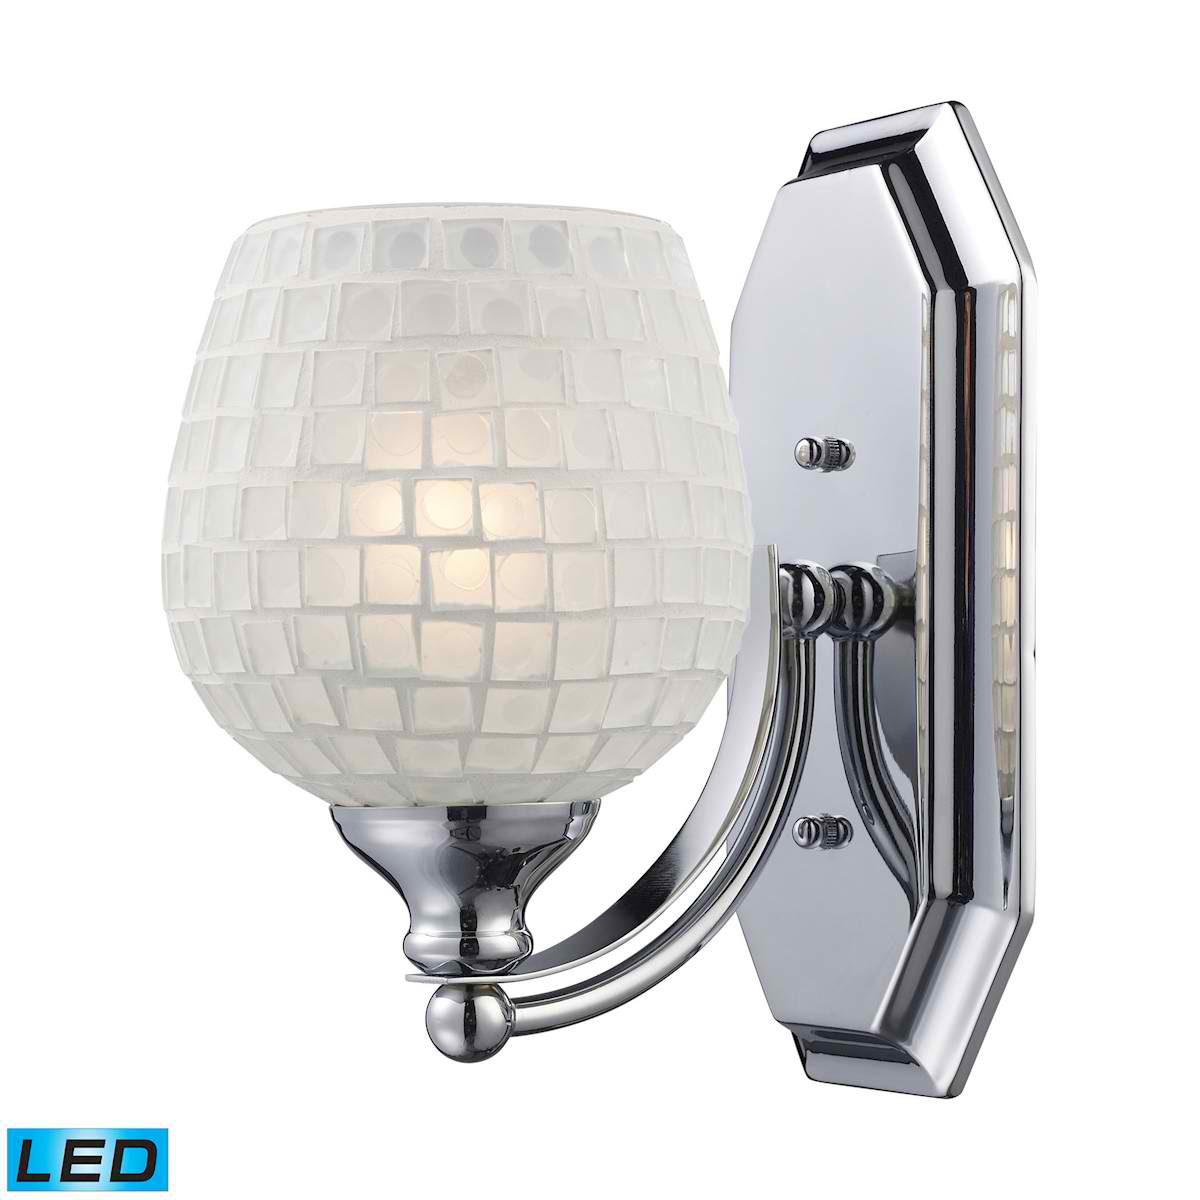 1 Light Vanity in Polished Chrome and White Mosaic Glass - LED Offering Up To 800 Lumens (60 Watt Equivalent)